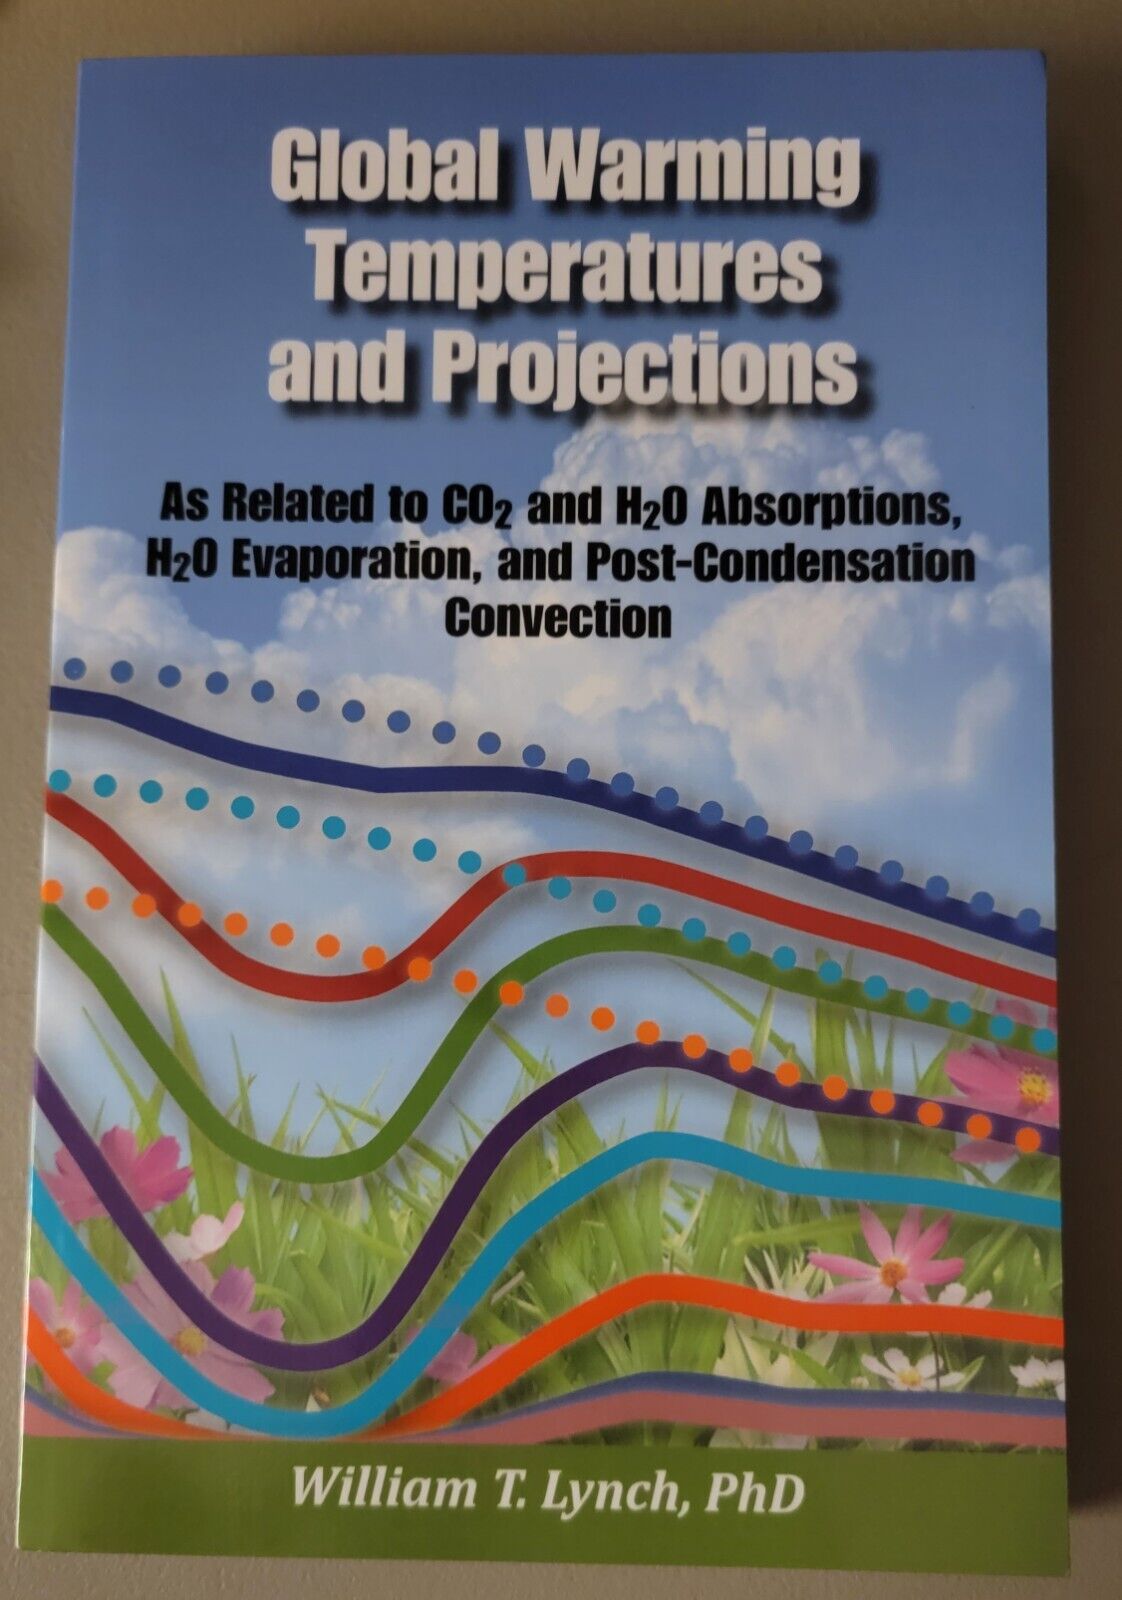 9781365927461 Global Warming Temperatures & Projections William Lynch Like new